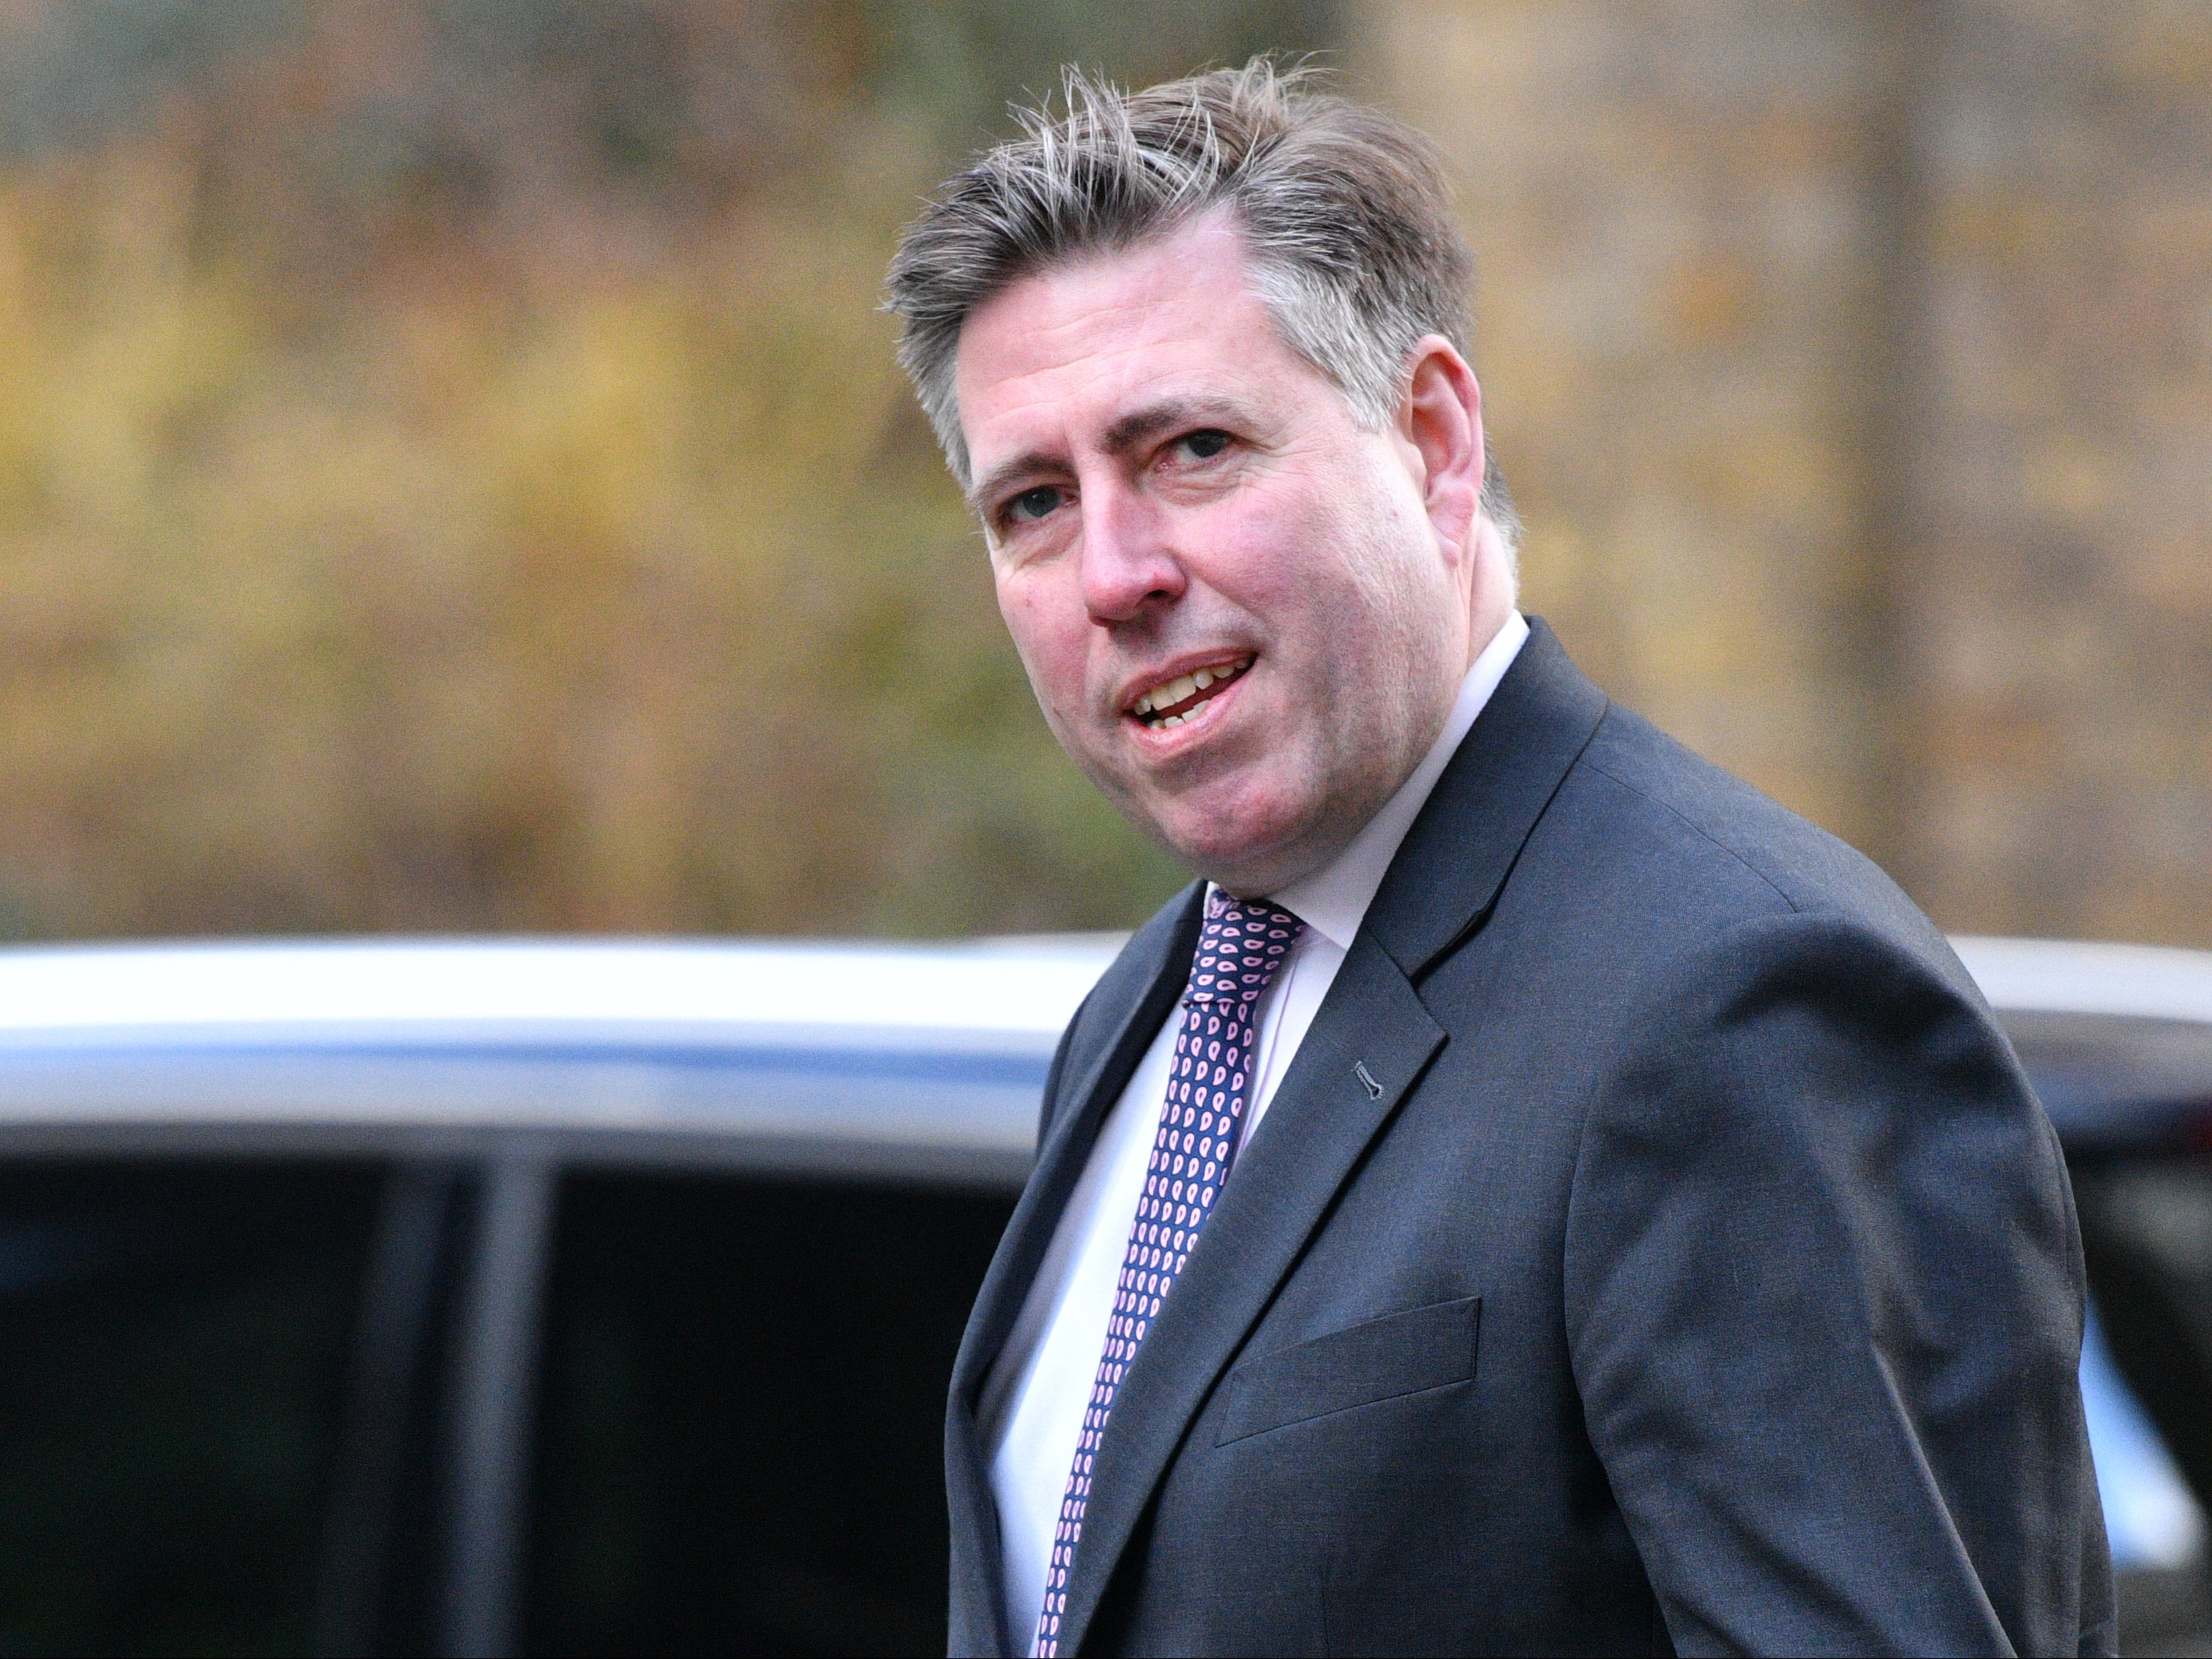 Graham Brady is the chair of the Conservatives 1922 Committee